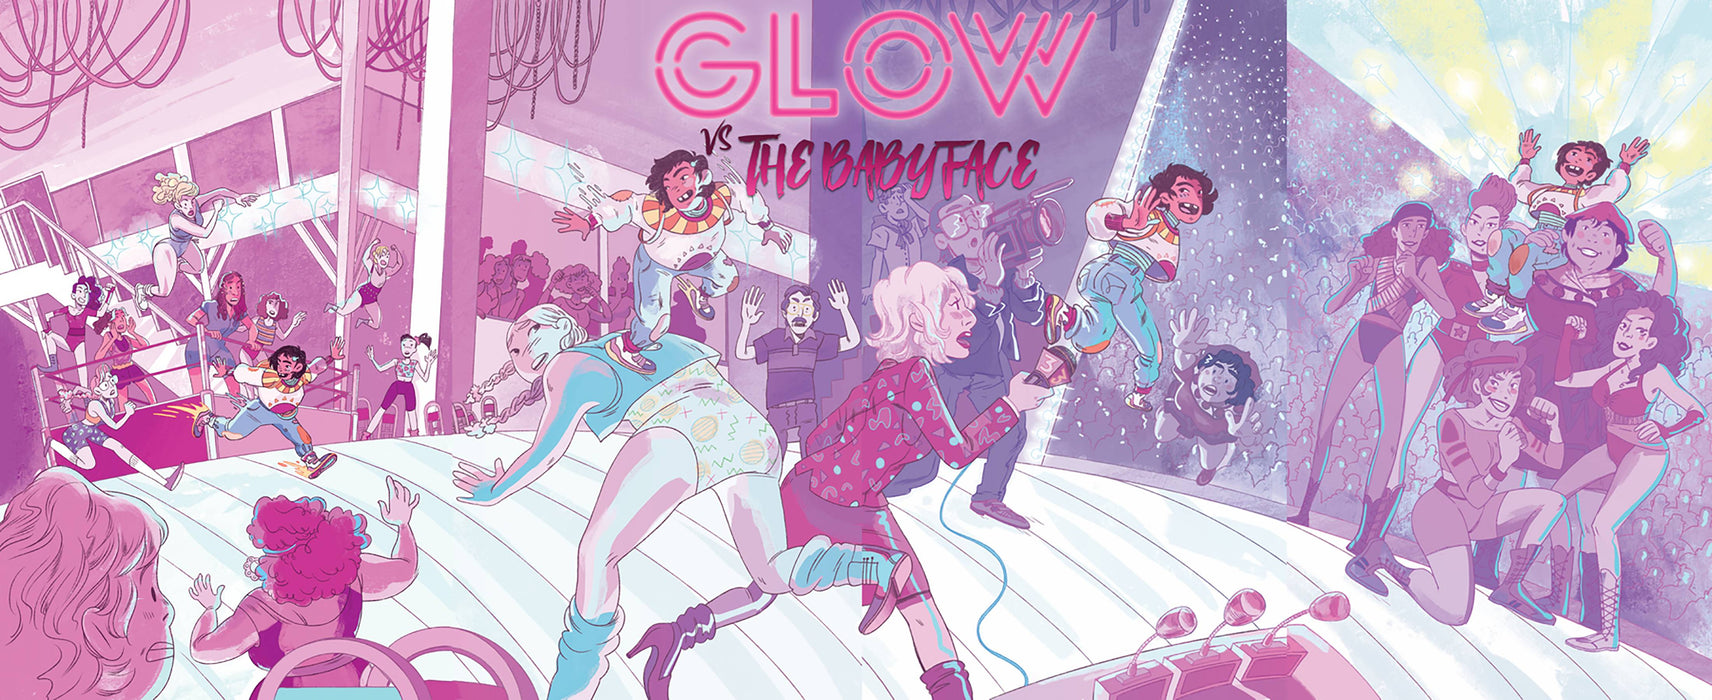 Glow Vs The Babyface (2019) #1 (COVER A FISH)